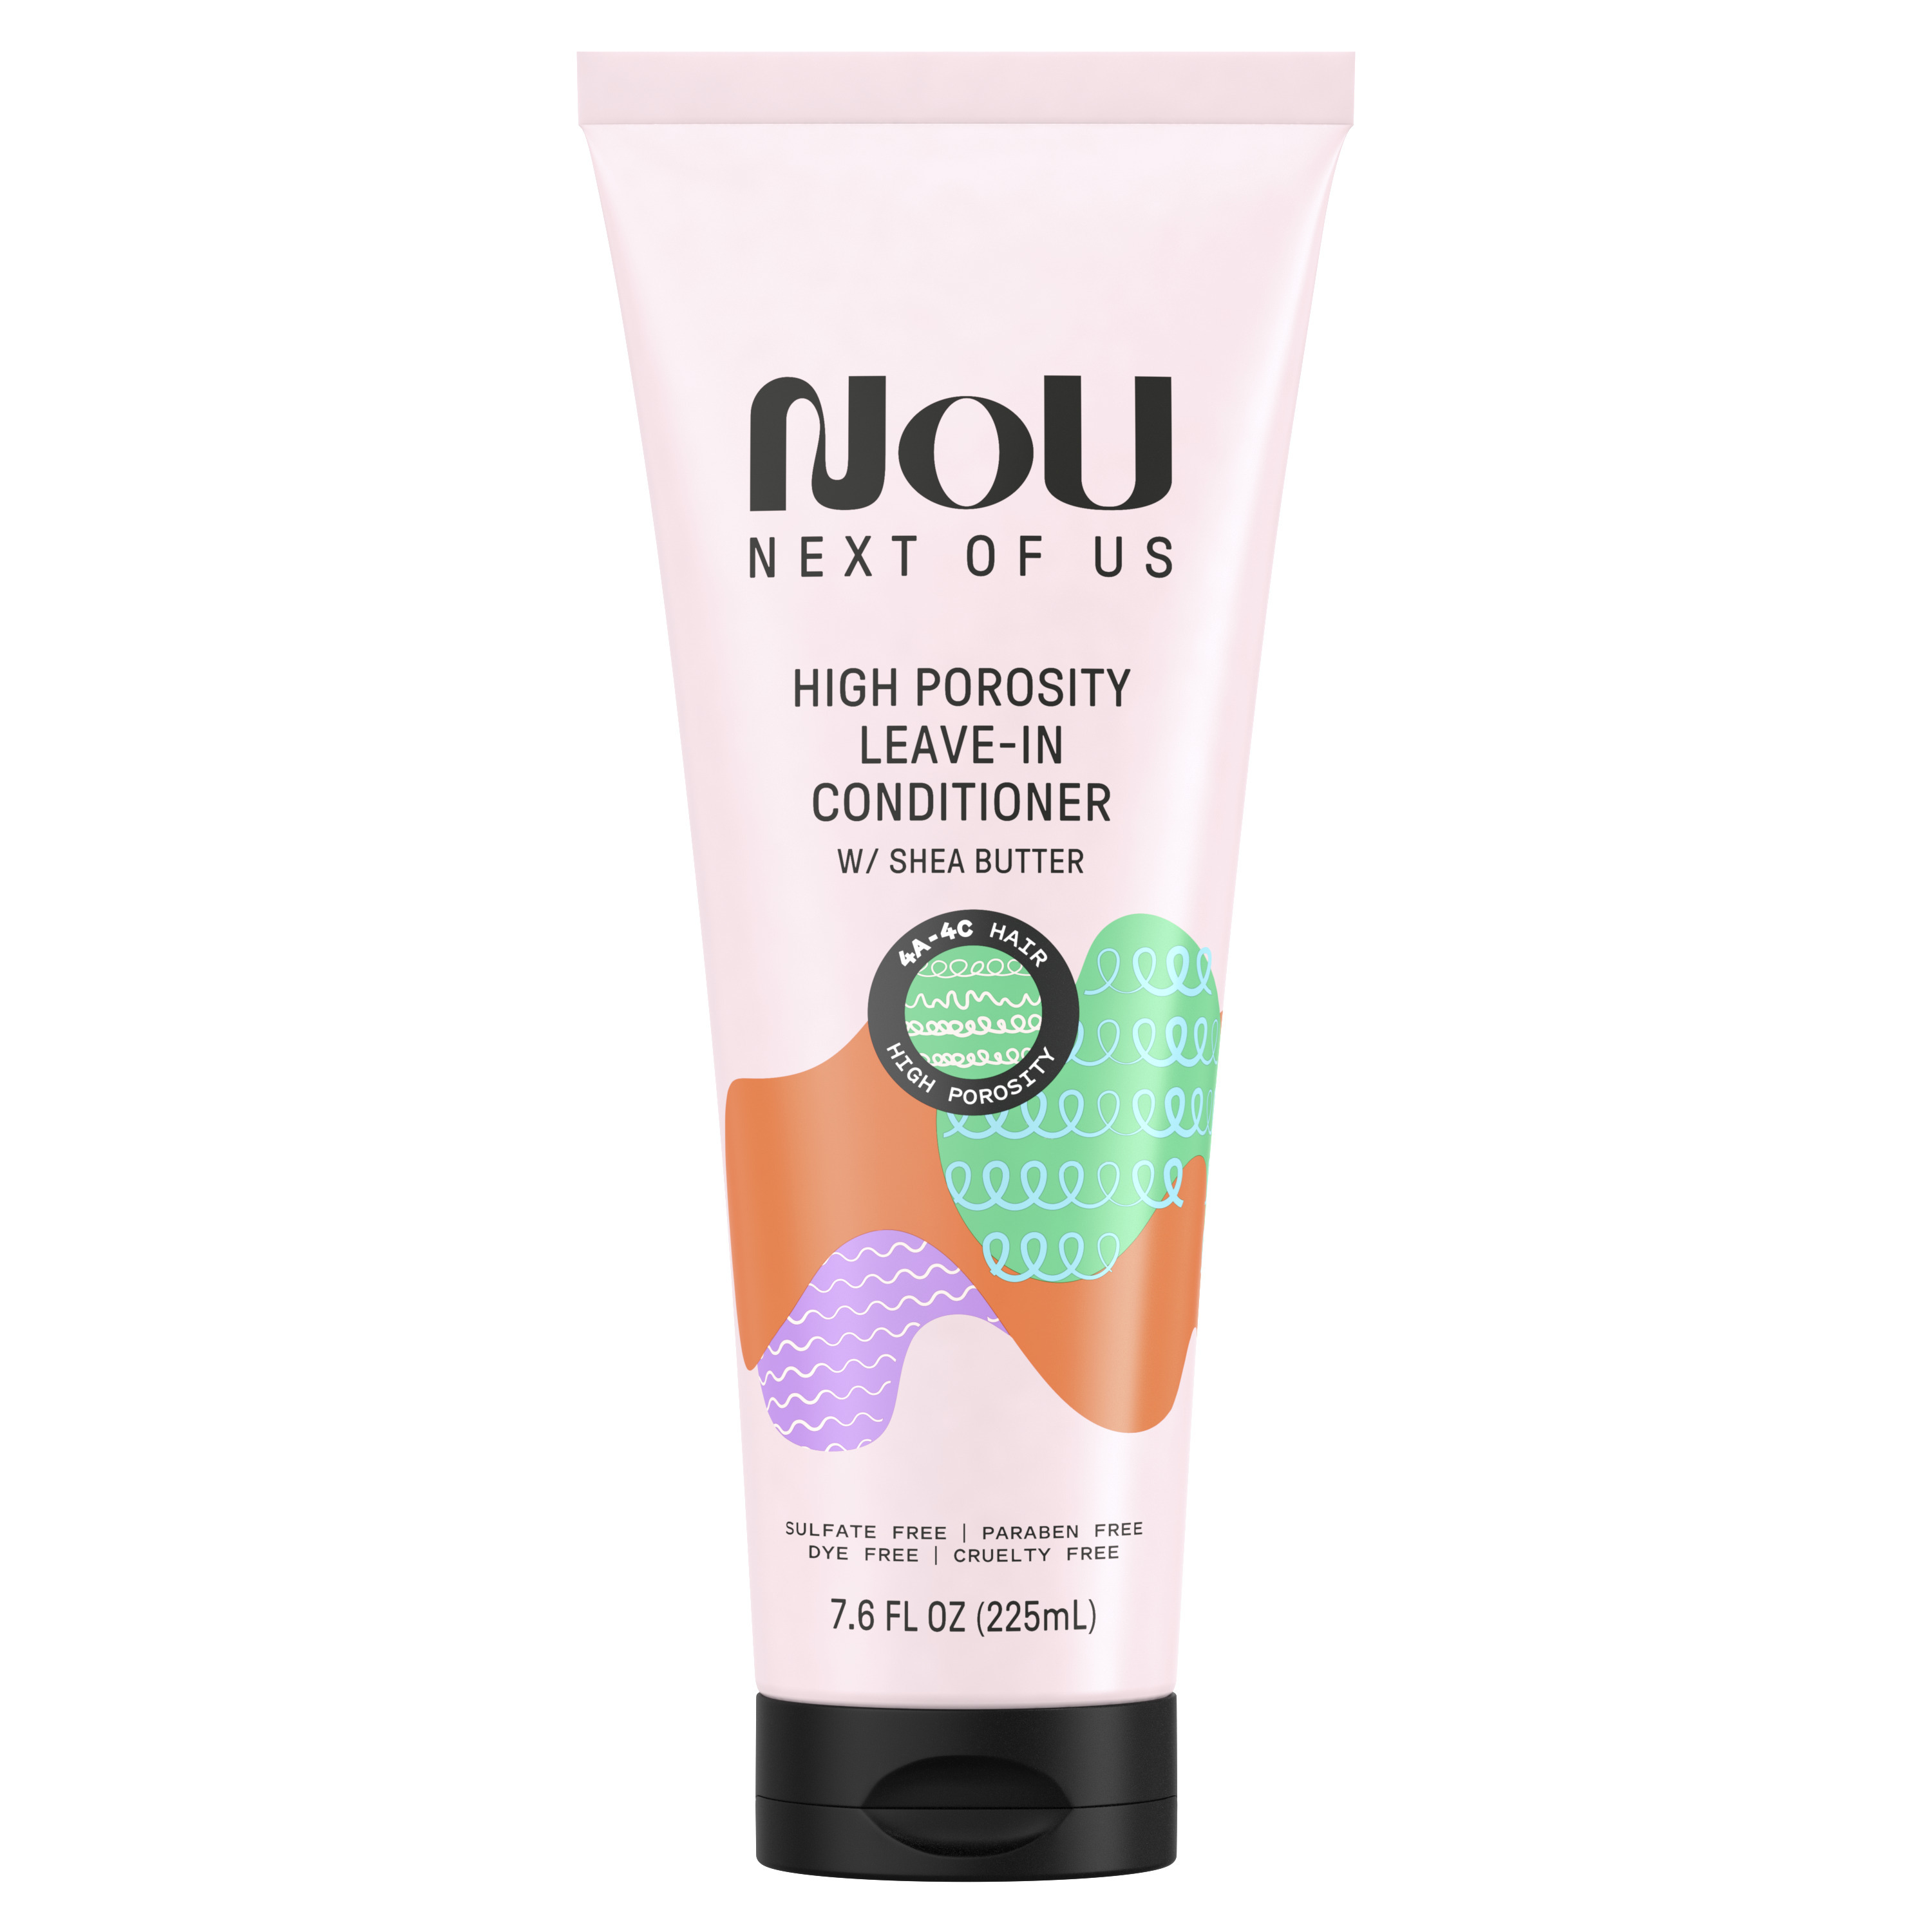 NOU High Porosity Leave-in Conditioner, for Coily & Curly Hair, 7.6 fl oz - image 1 of 11